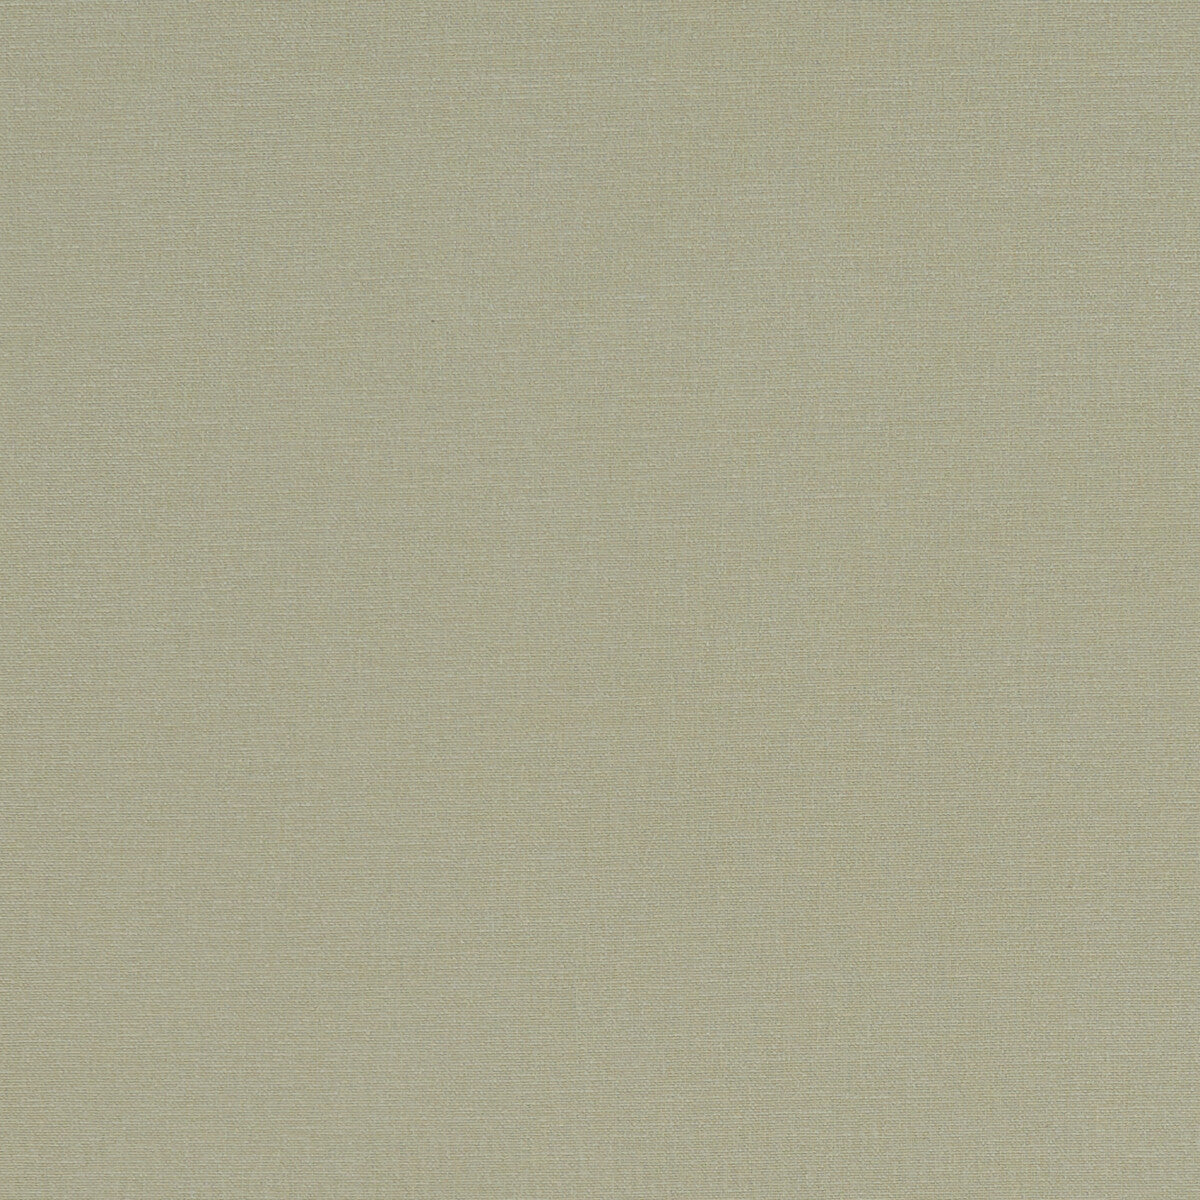 Alora fabric in khaki color - pattern F1097/30.CAC.0 - by Clarke And Clarke in the Alora By Studio G For C&amp;C collection